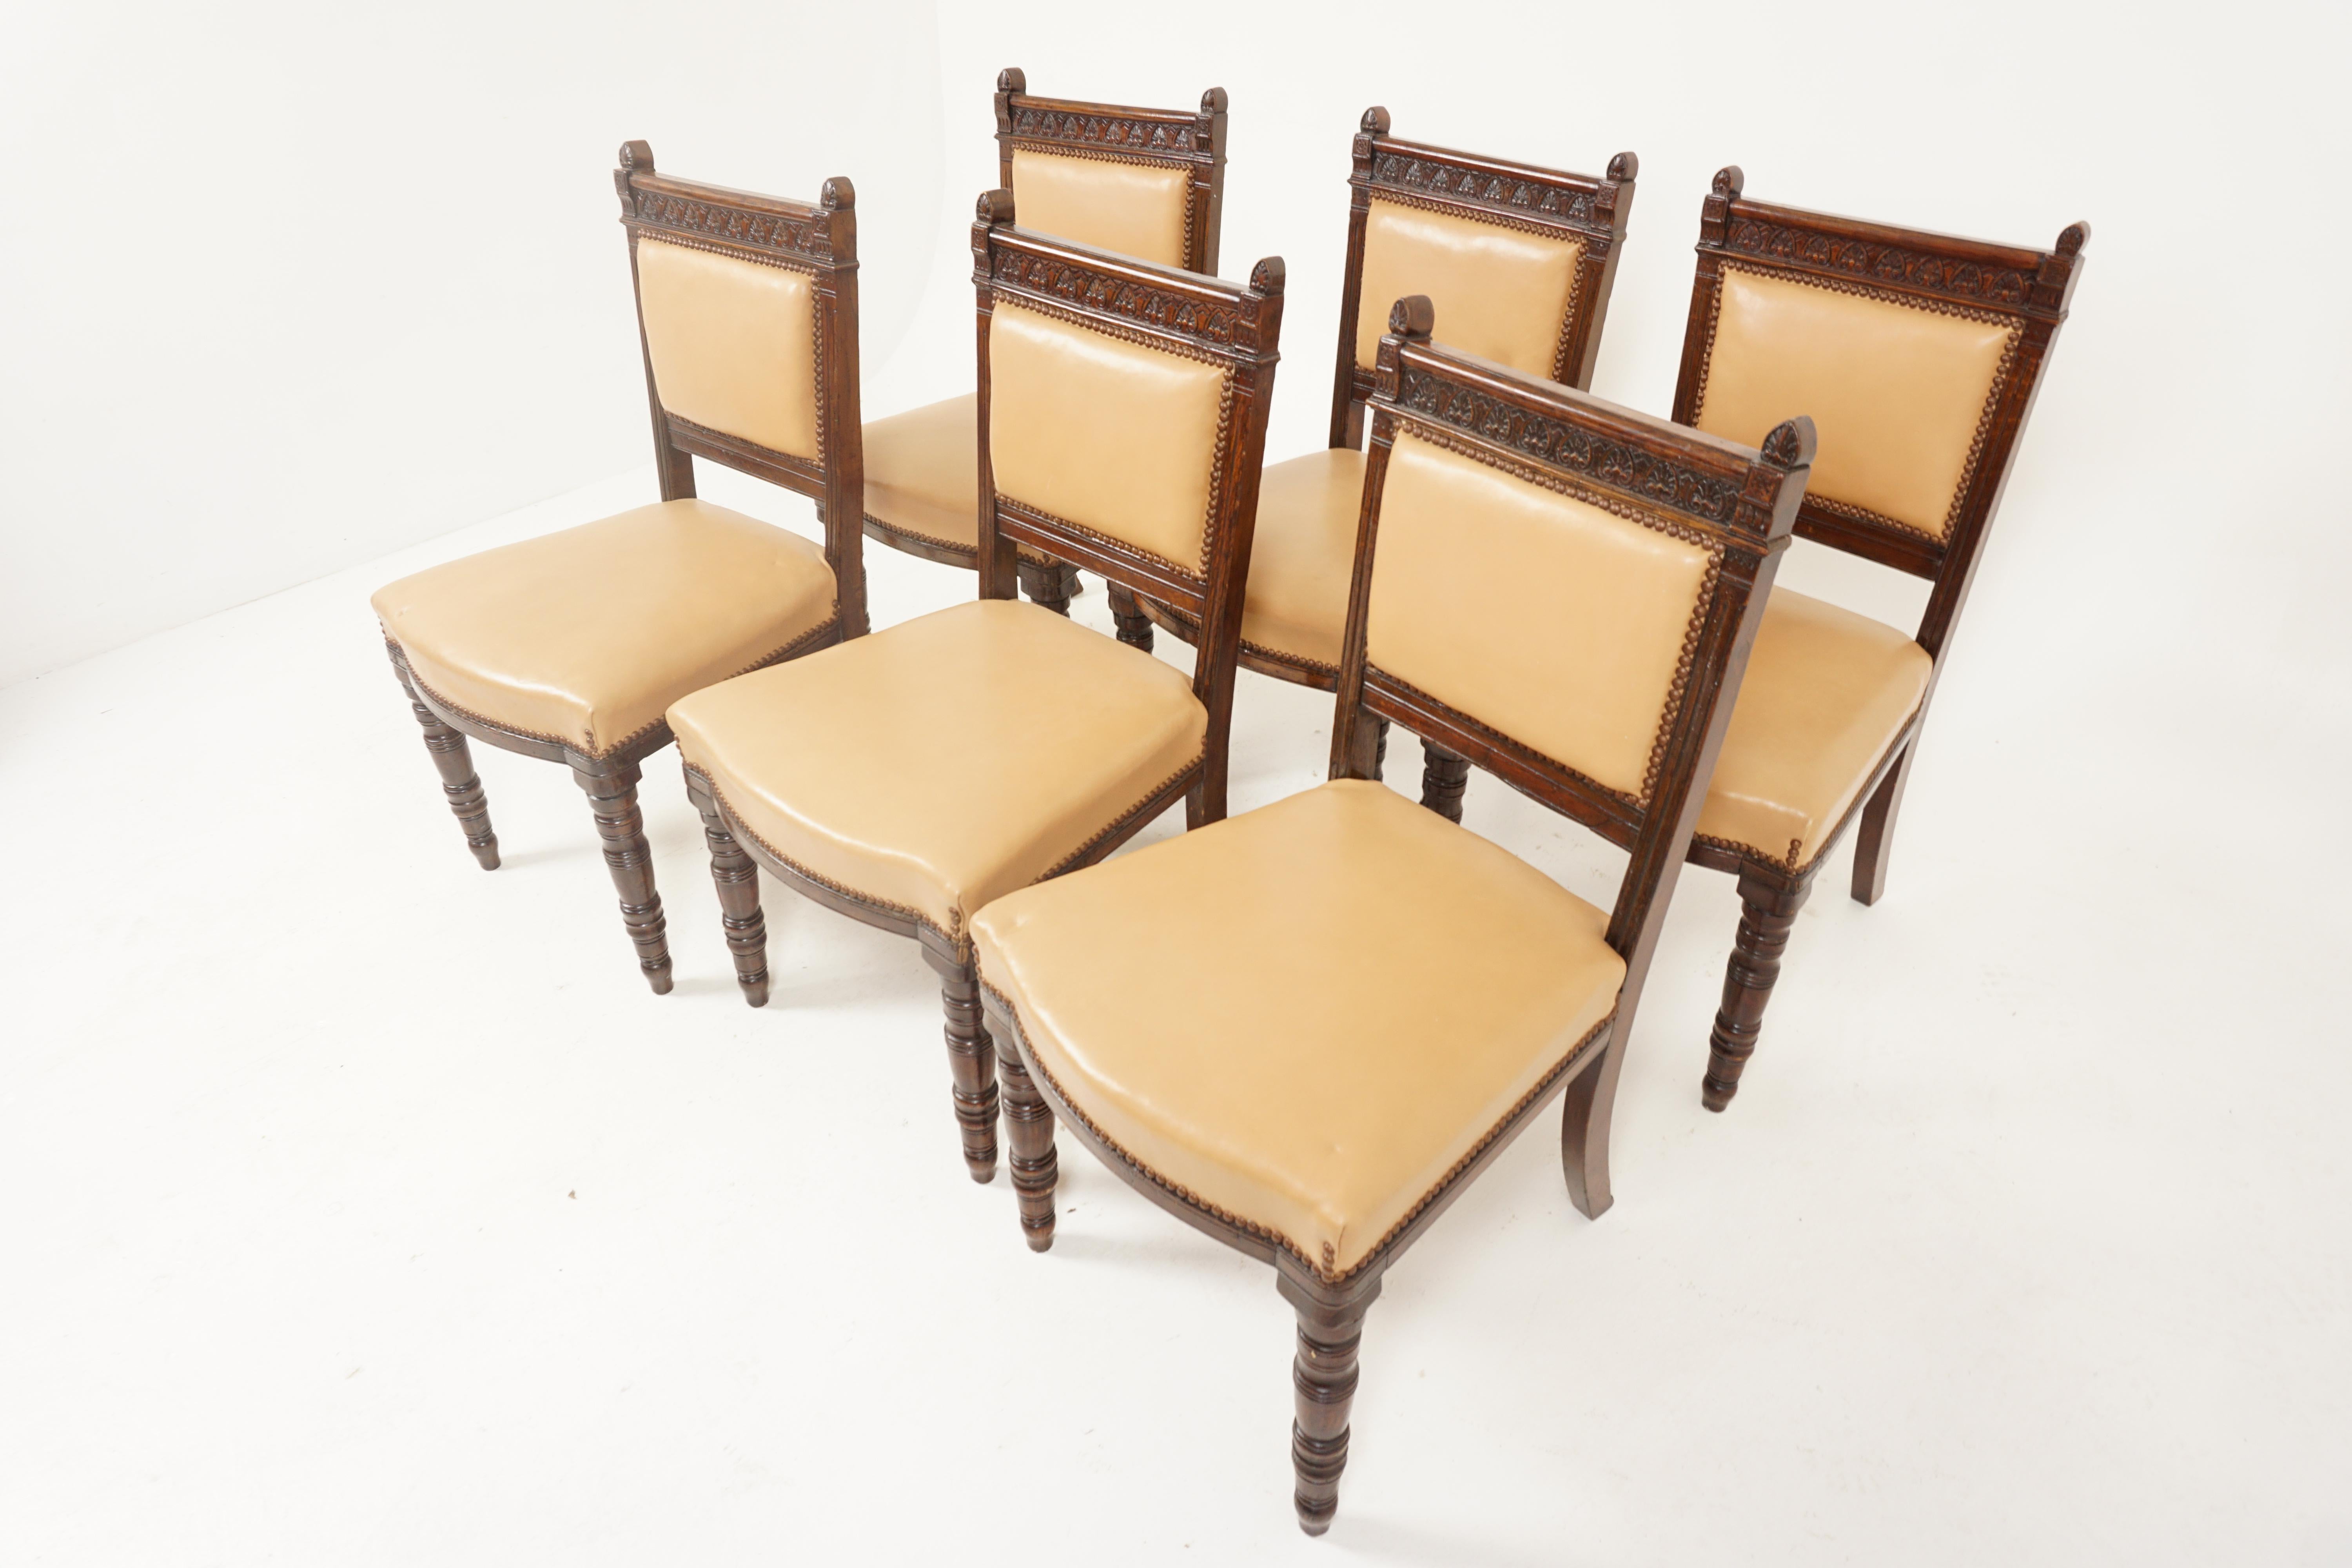 Antique dining chairs, set of 6, oak, Scotland 1895, B2664

Scotland 1895
Solid oak
Original finish
Carved top rail flanked by upright supports
Upholstered padded back
Large stuff over seat with brass studding
Turned carved front legs and